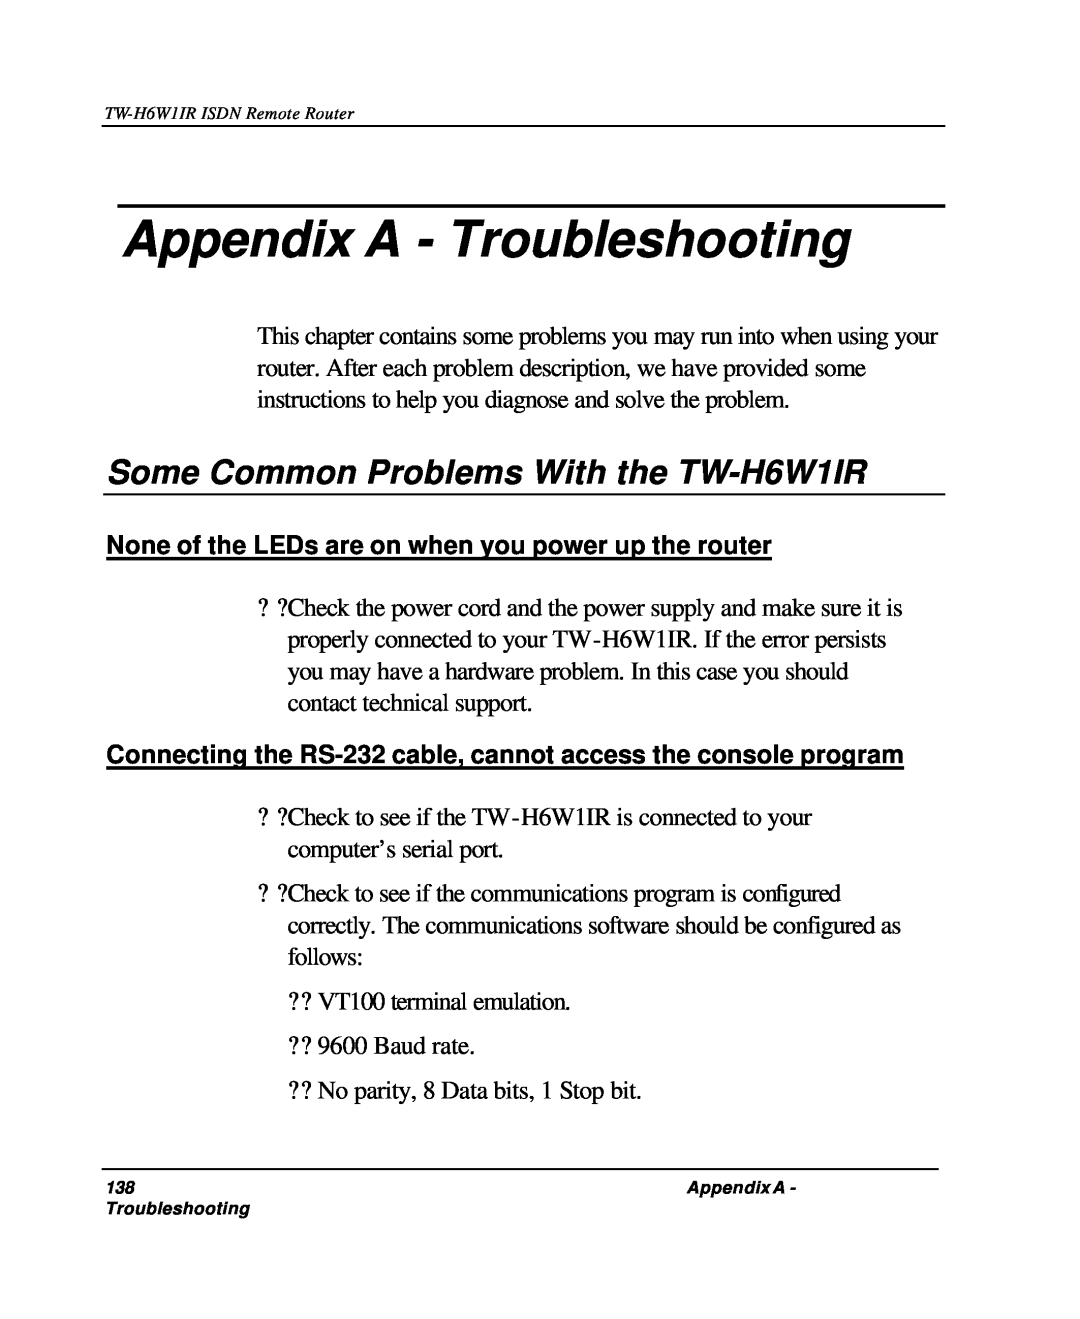 TRENDnet manual Appendix A - Troubleshooting, Some Common Problems With the TW-H6W1IR 